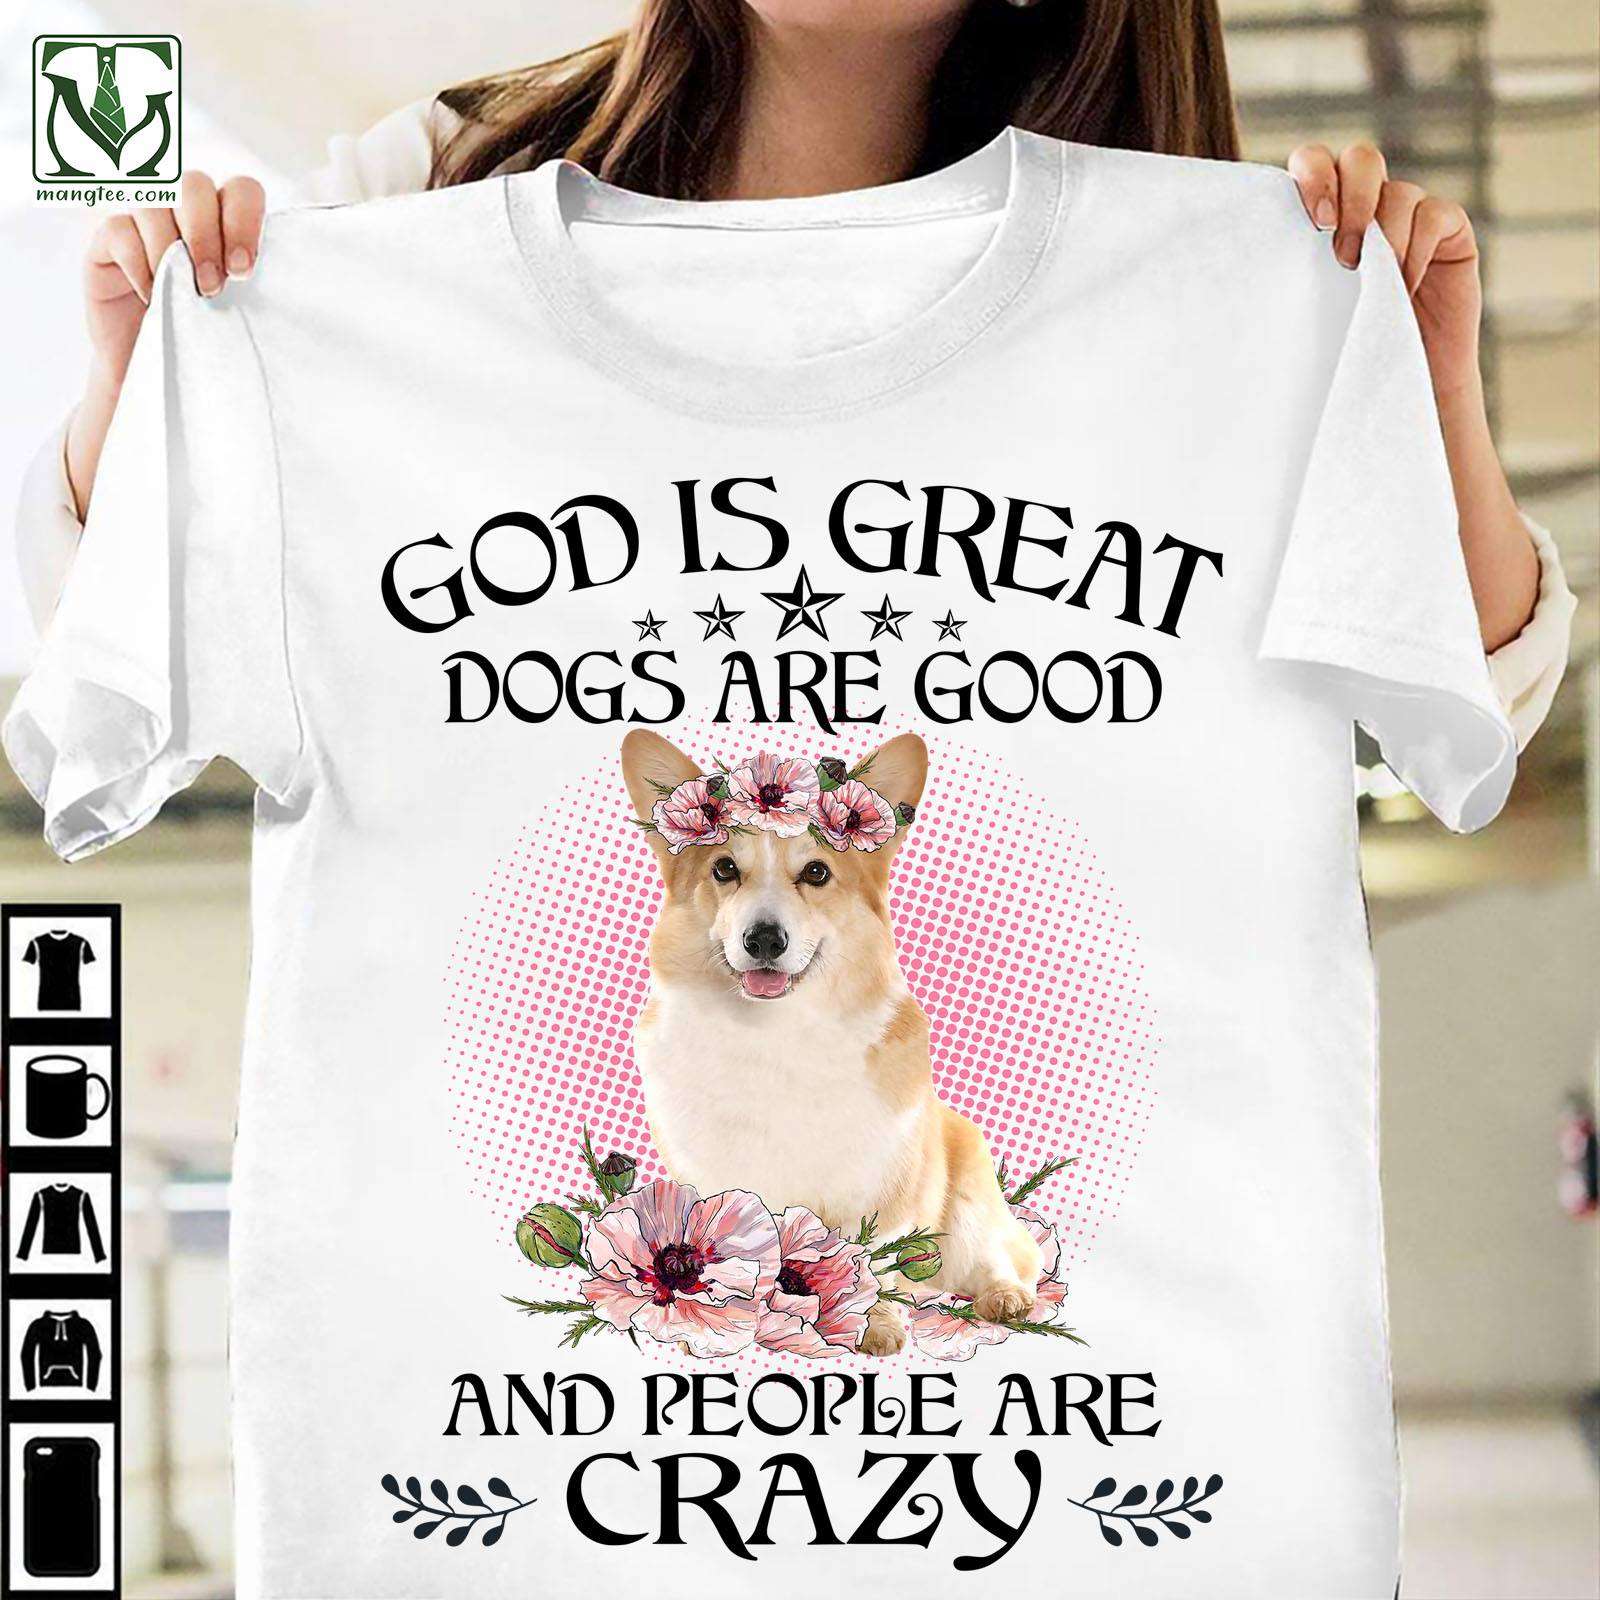 God is great dogs are good and people are crazy - Gorgeous Corgi dog